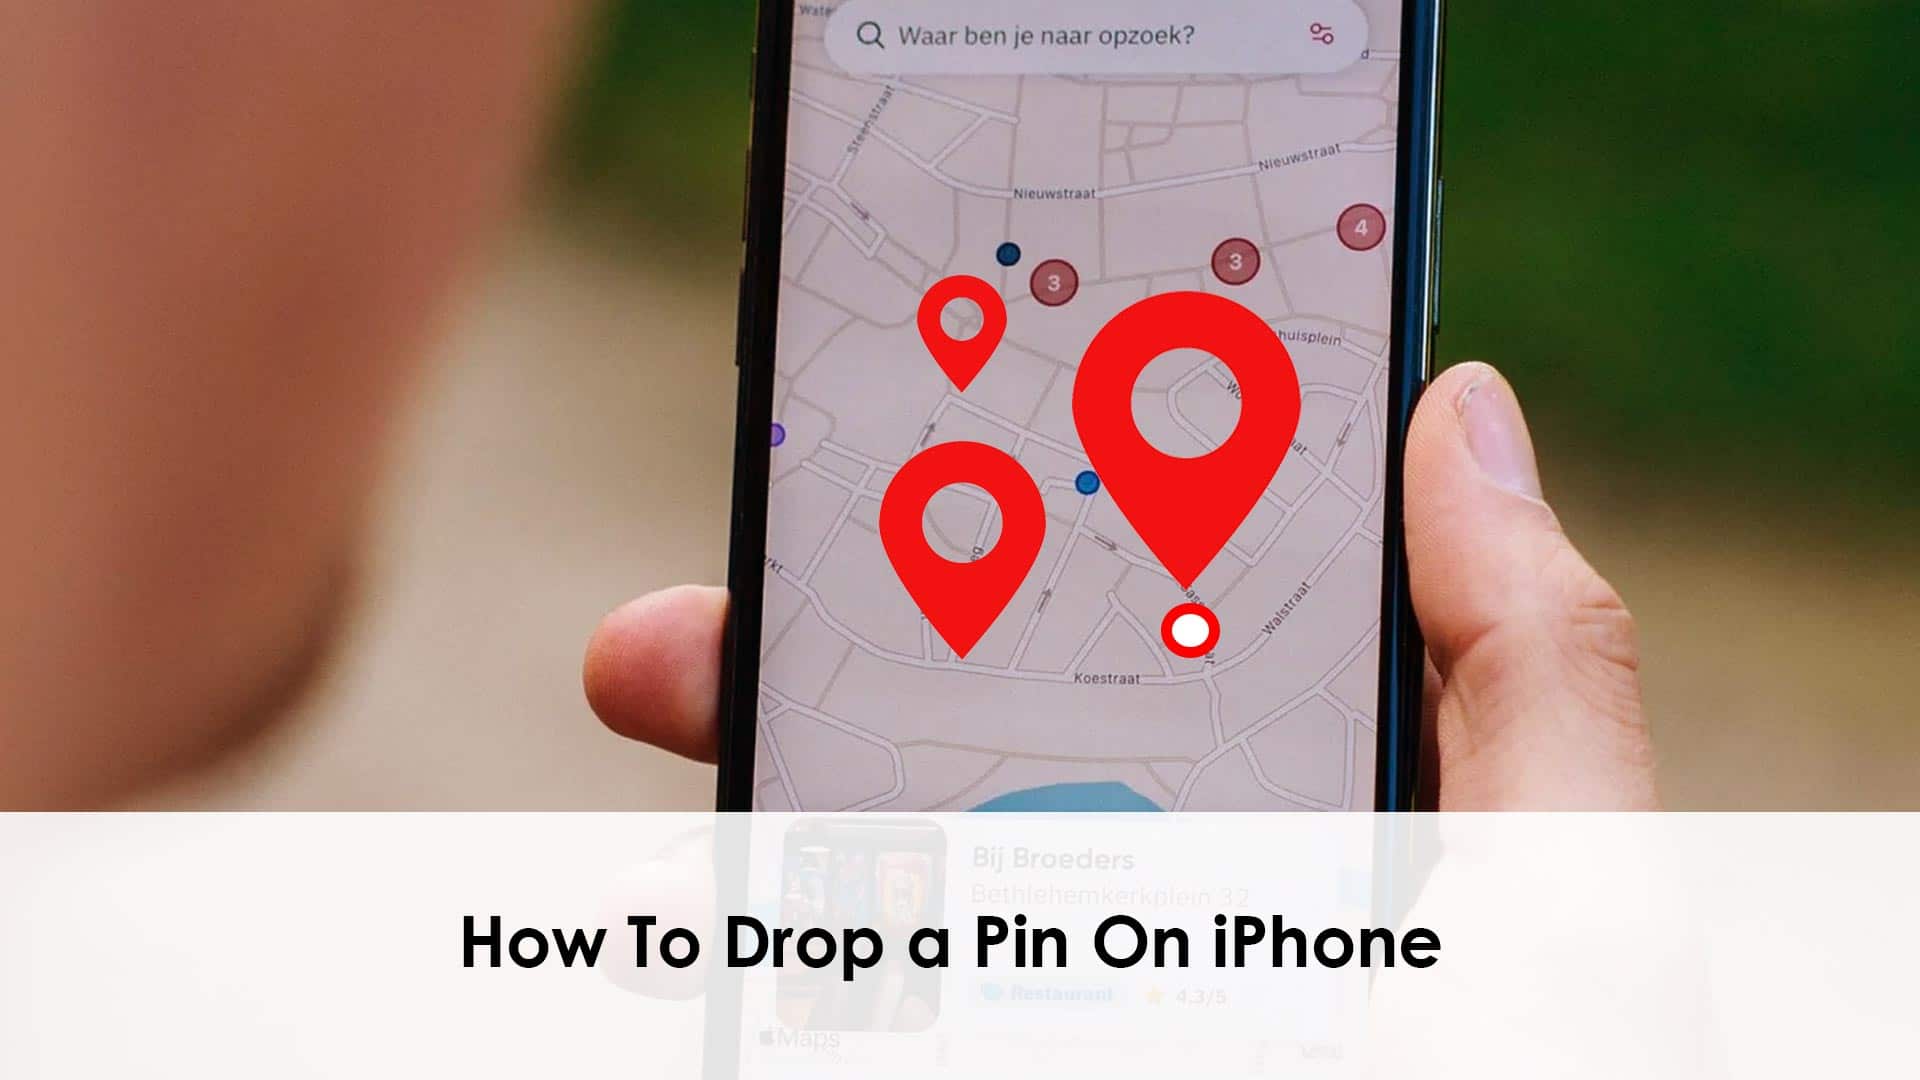 How To Drop a Pin On iPhone